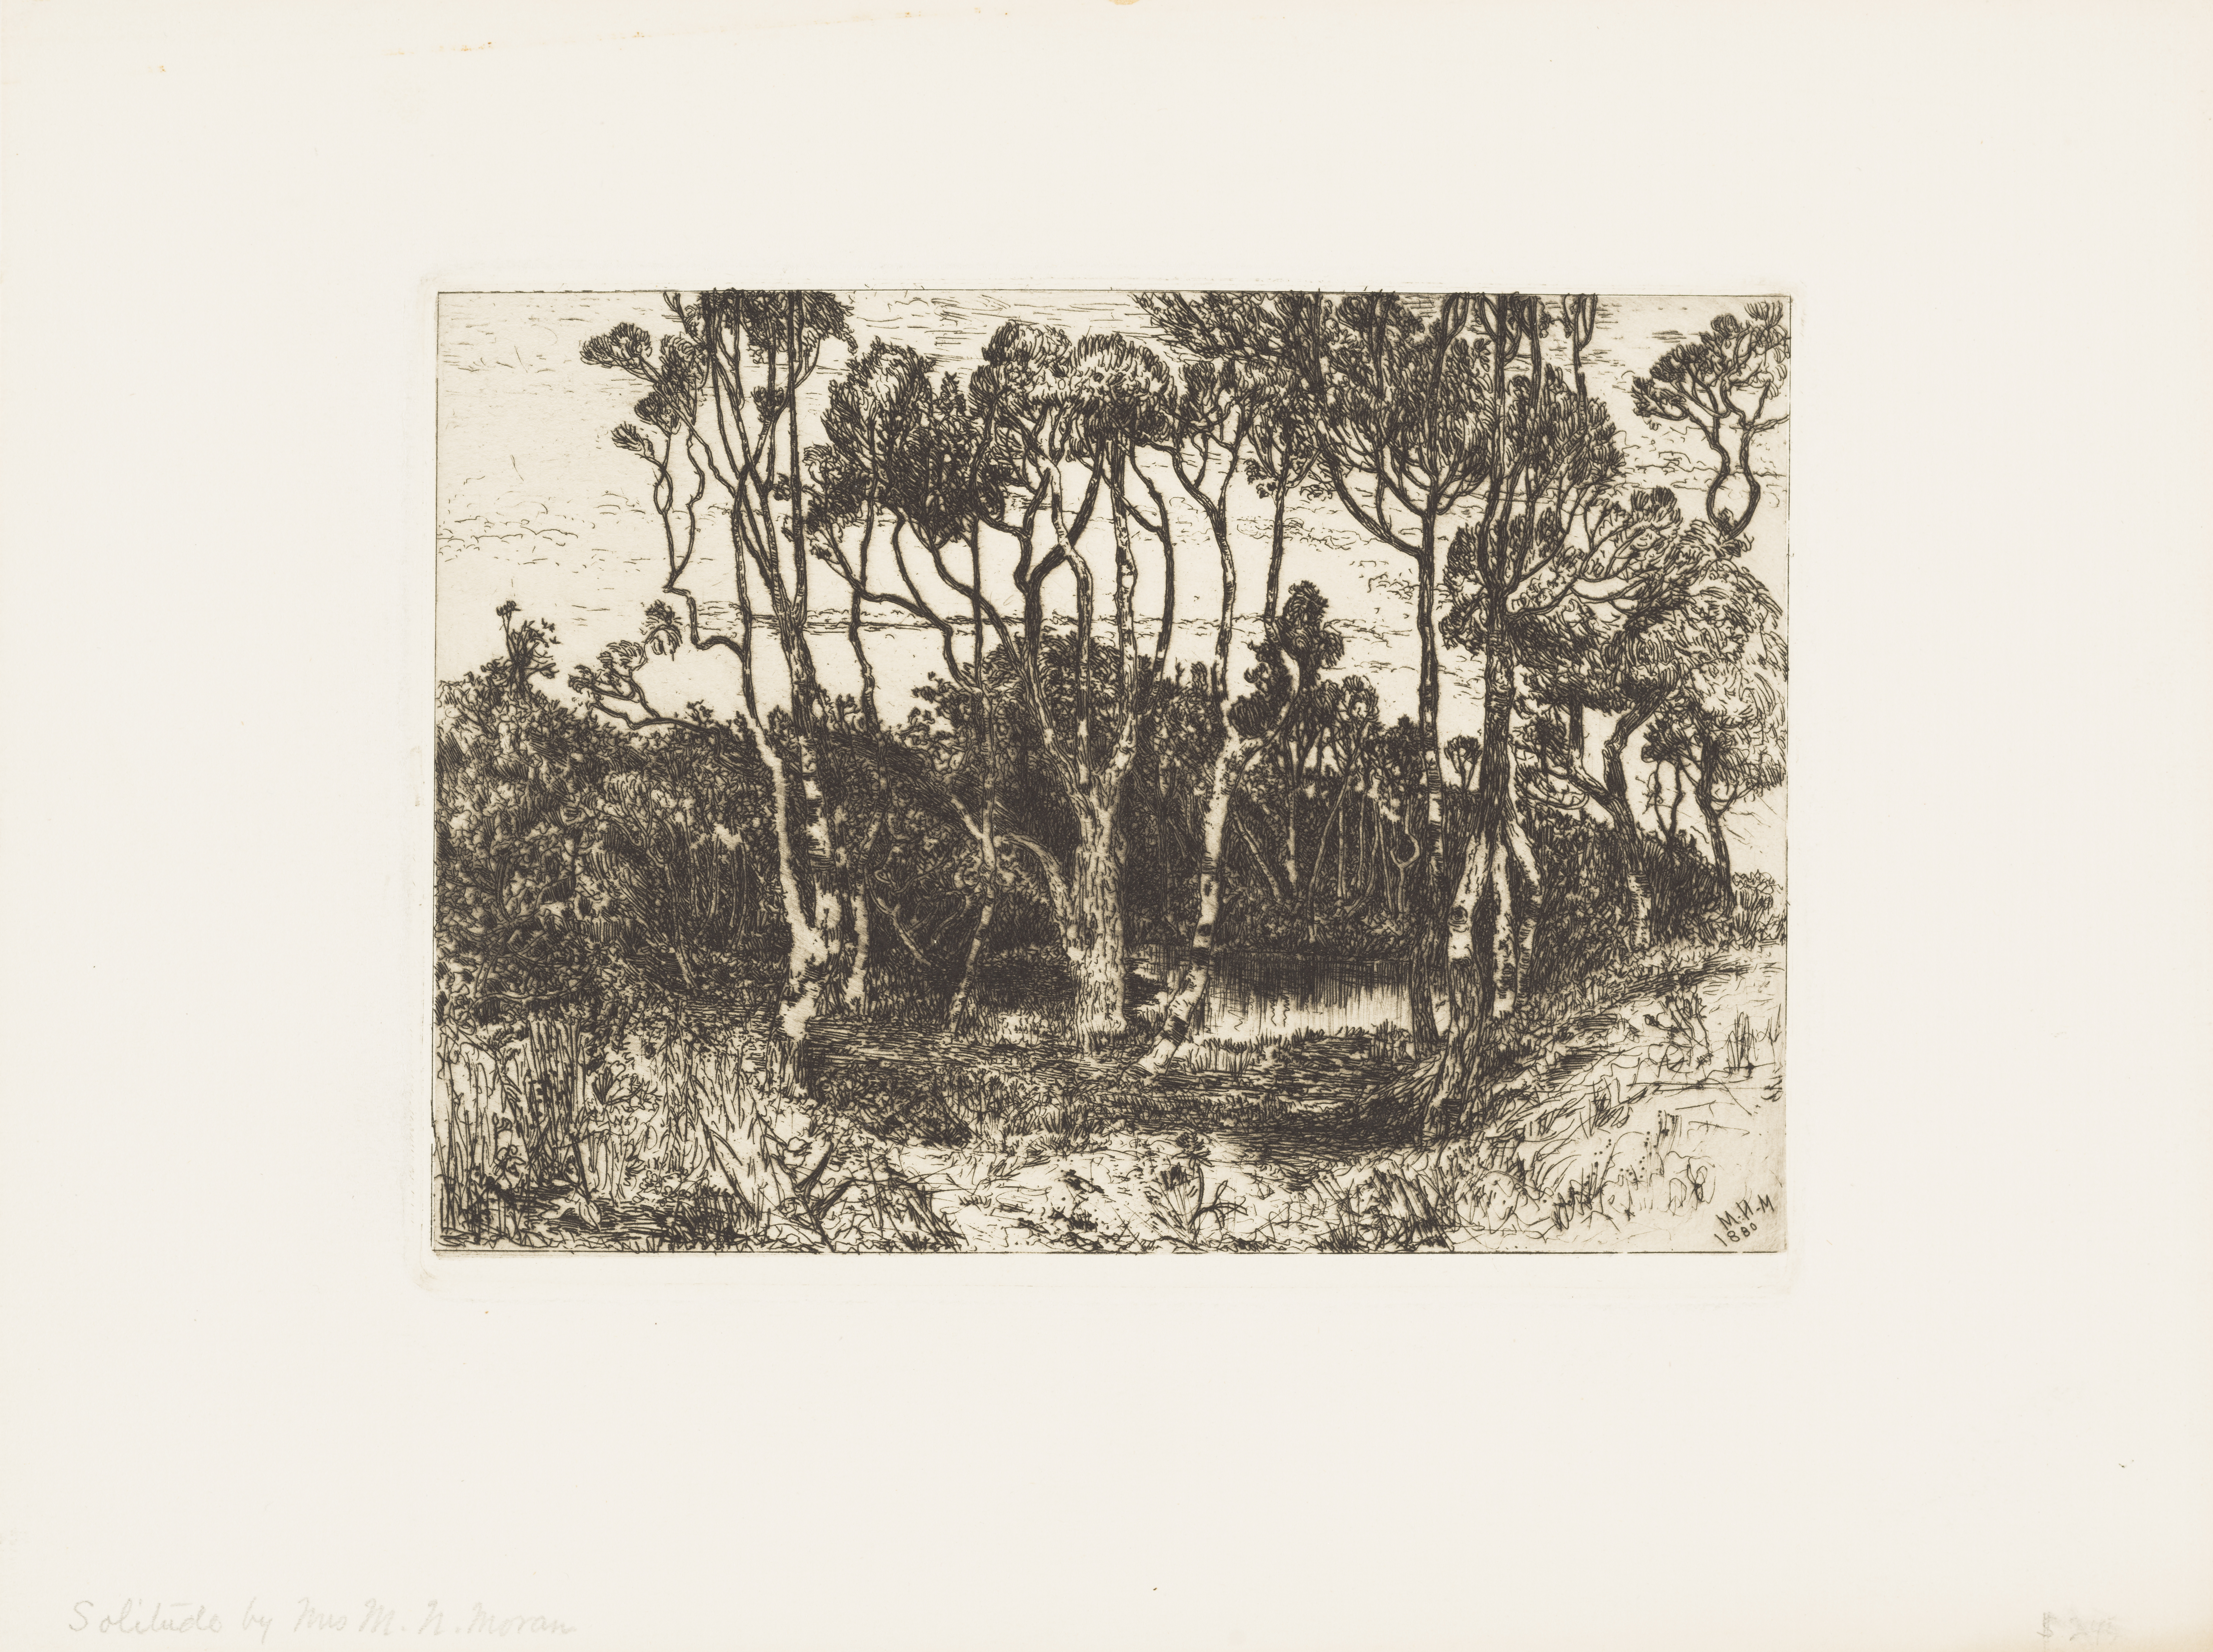 Mary Nimmo Moran's Solitude, etching of a forest scene with tall shady trees and a reflecting pond